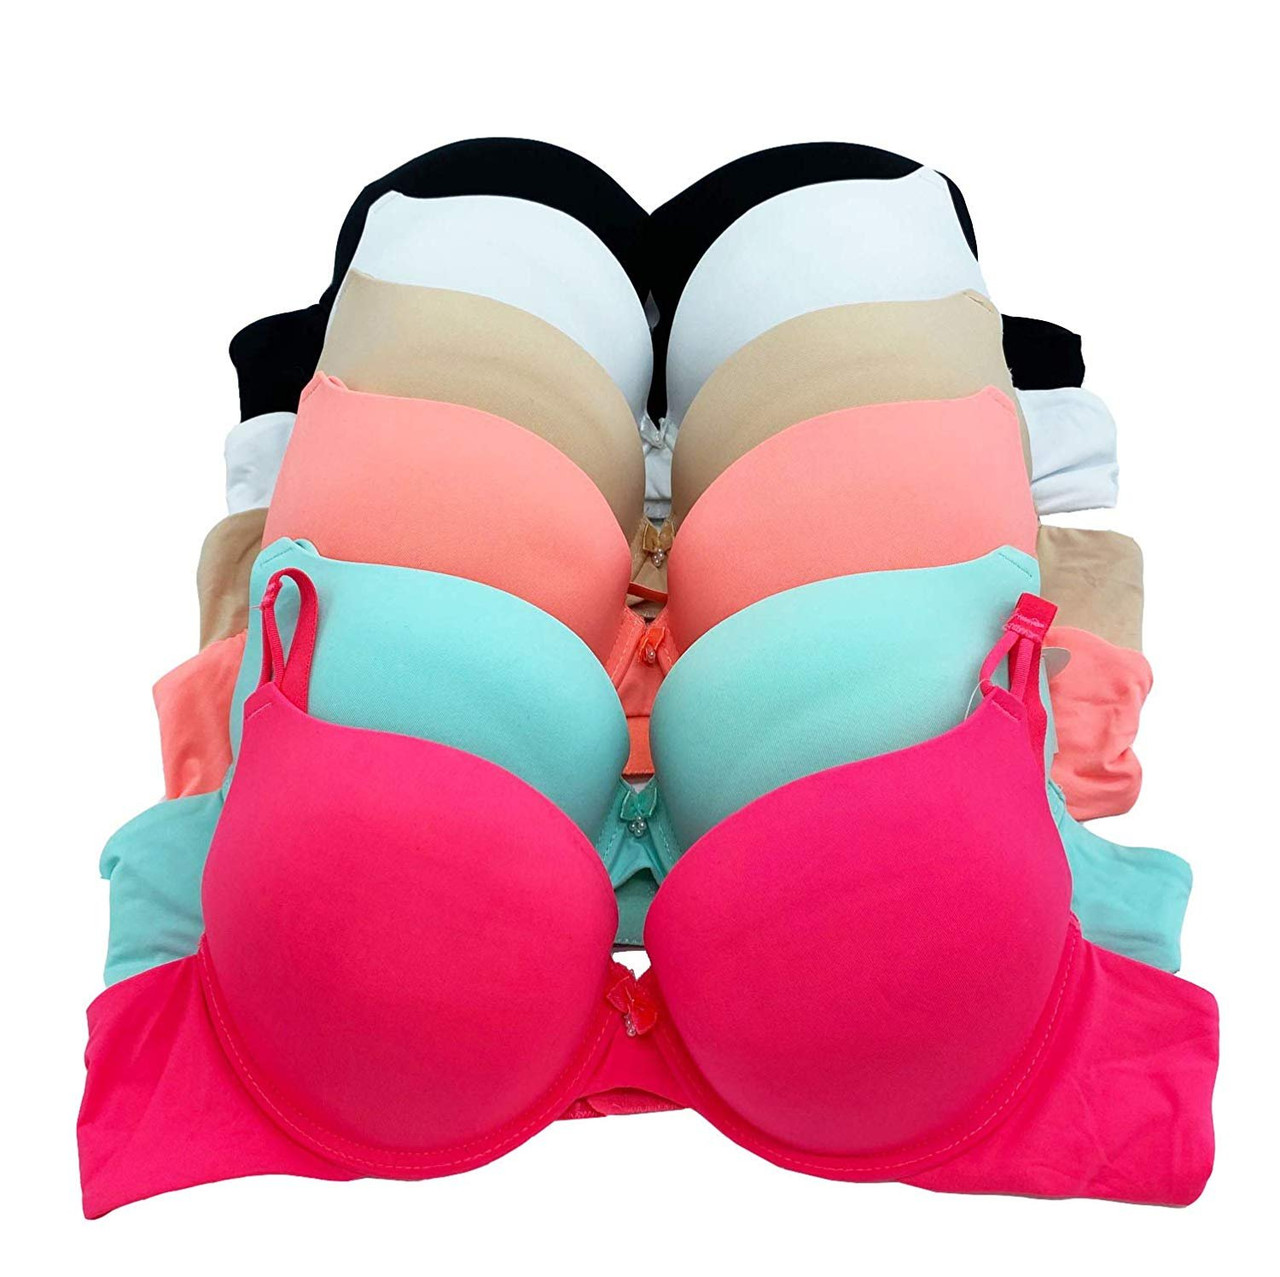 Buy Romabra 6 Pack B and C Cup Bras 6-Pack Bras Push up Bra For